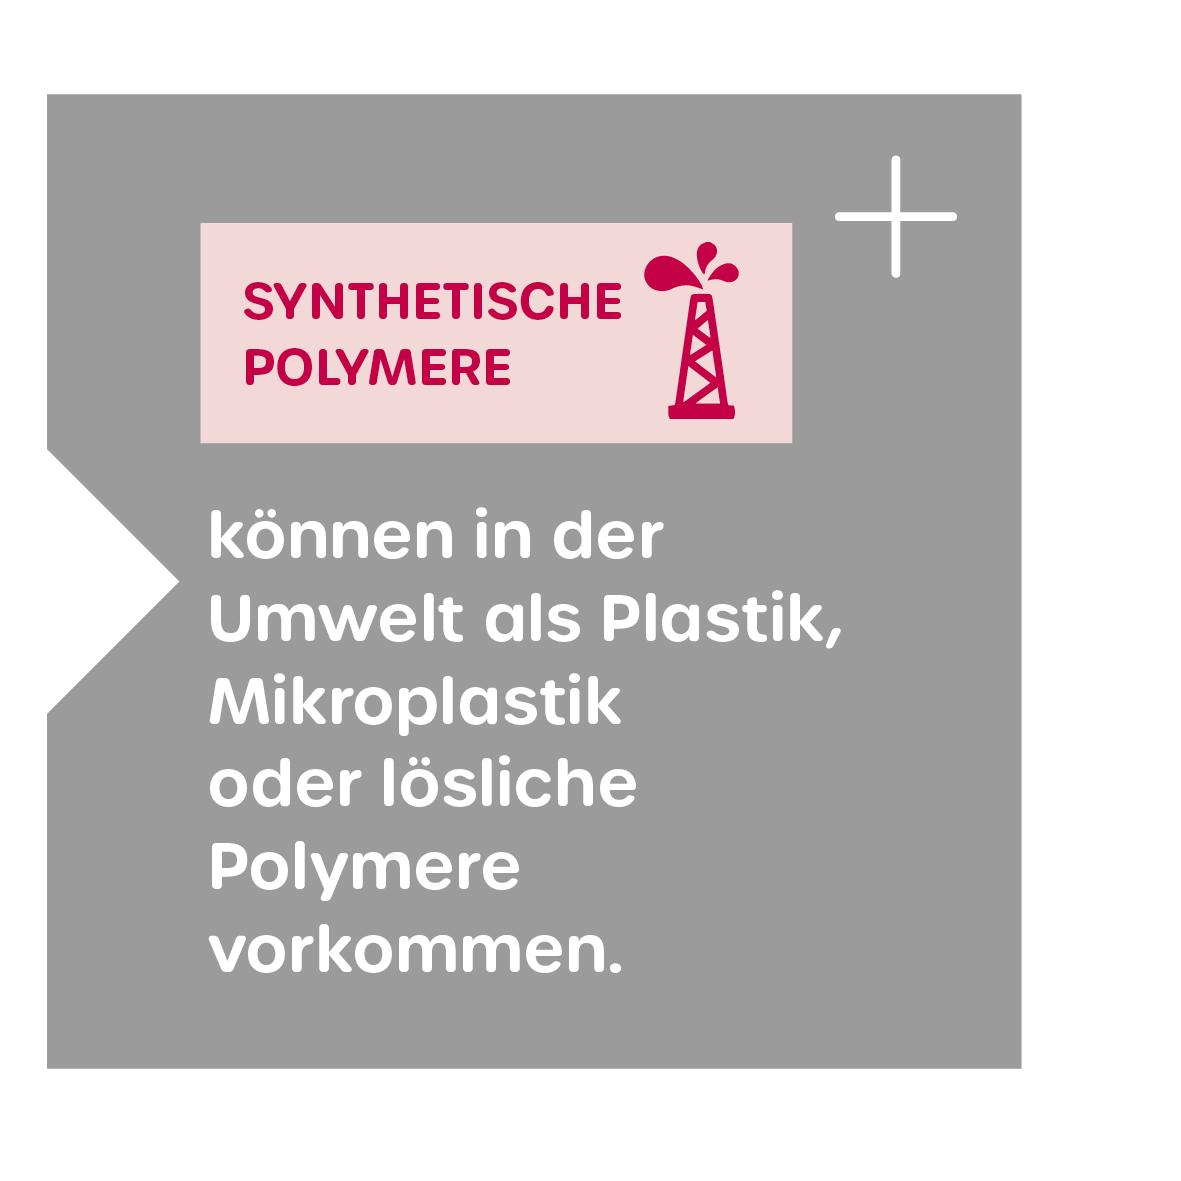 Synthetische Polymere